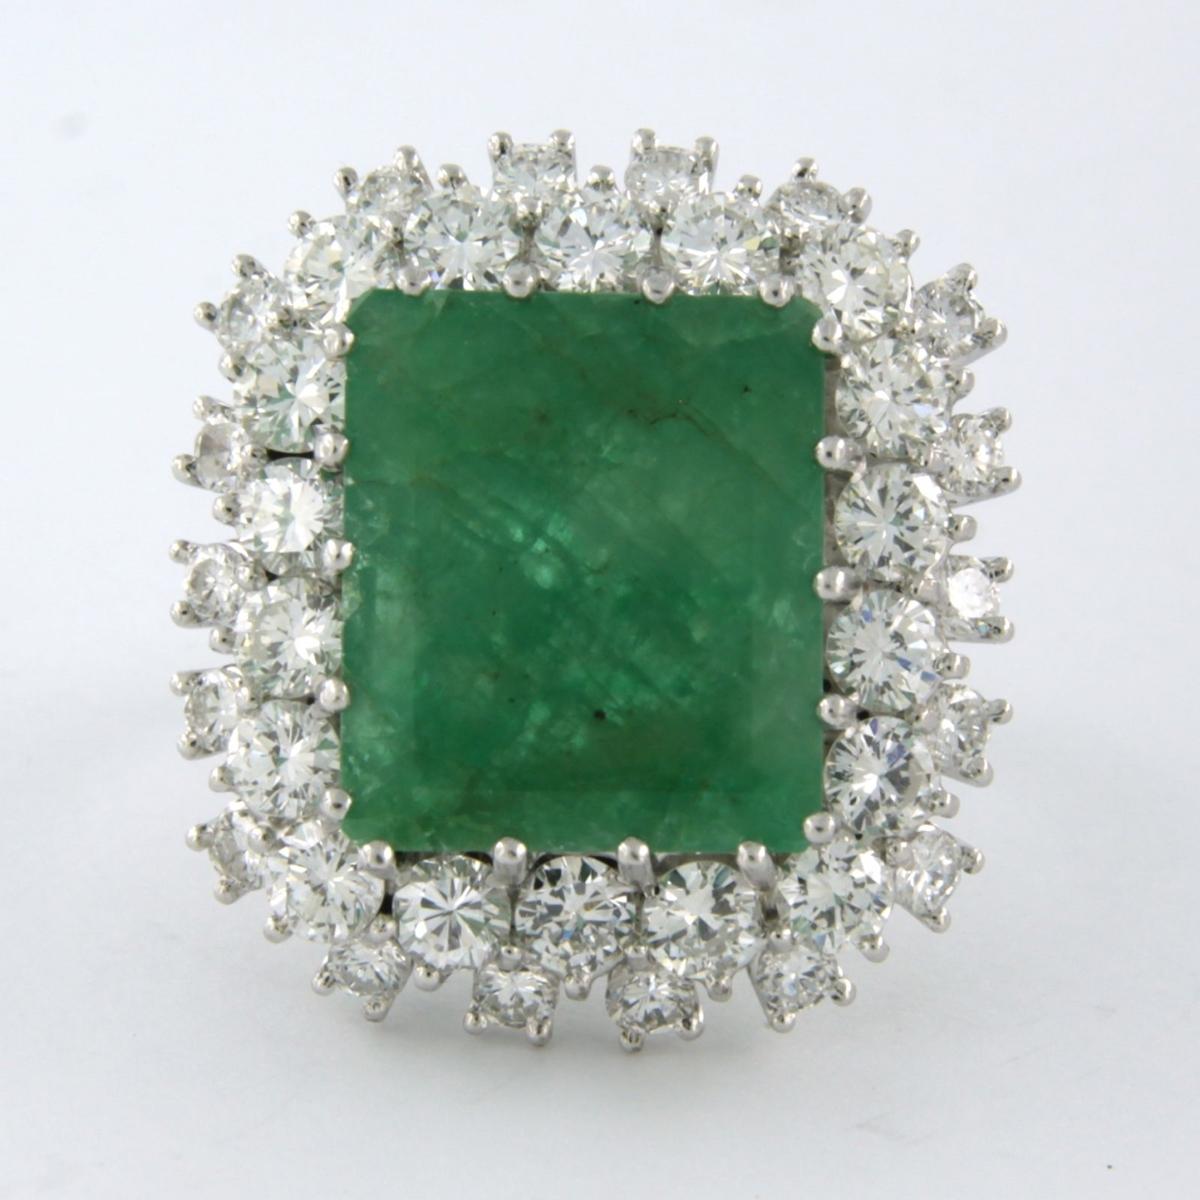 14k white gold cluster ring set with an emerald in the center. 5.00ct and an entourage of brilliant cut diamonds totaling 4.00ct - F/G - VS/SI - ring size U.S. 6.5(17/53)

detailed description:

The top of the ring is 2.5 cm wide by 9.1 mm